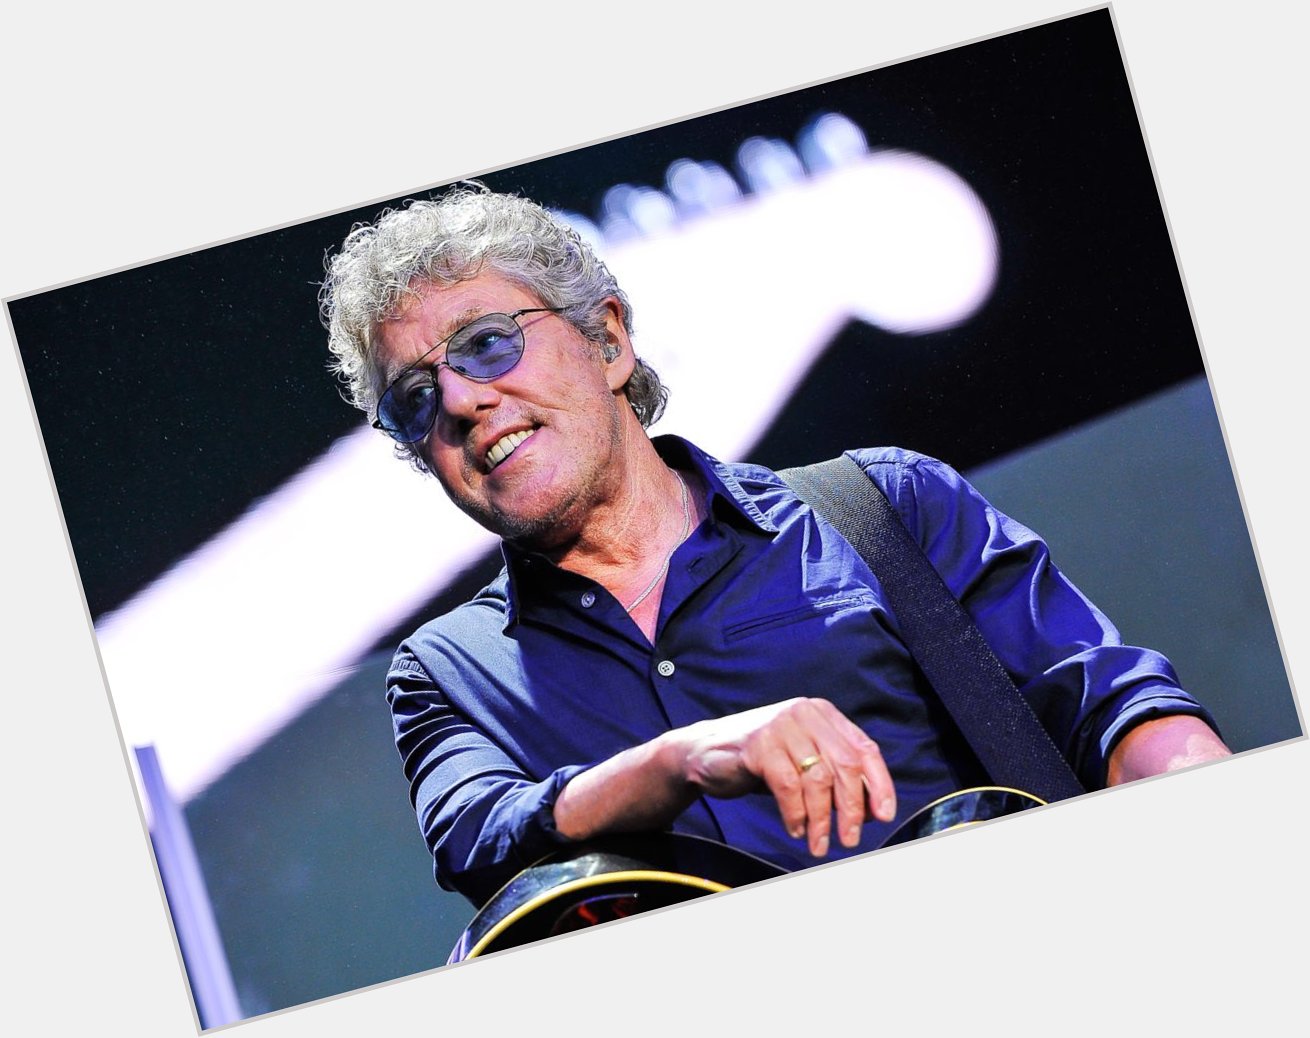 HAPPY BIRTHDAY ROGER DALTREY! One of the greats and a humanitarian of action. 